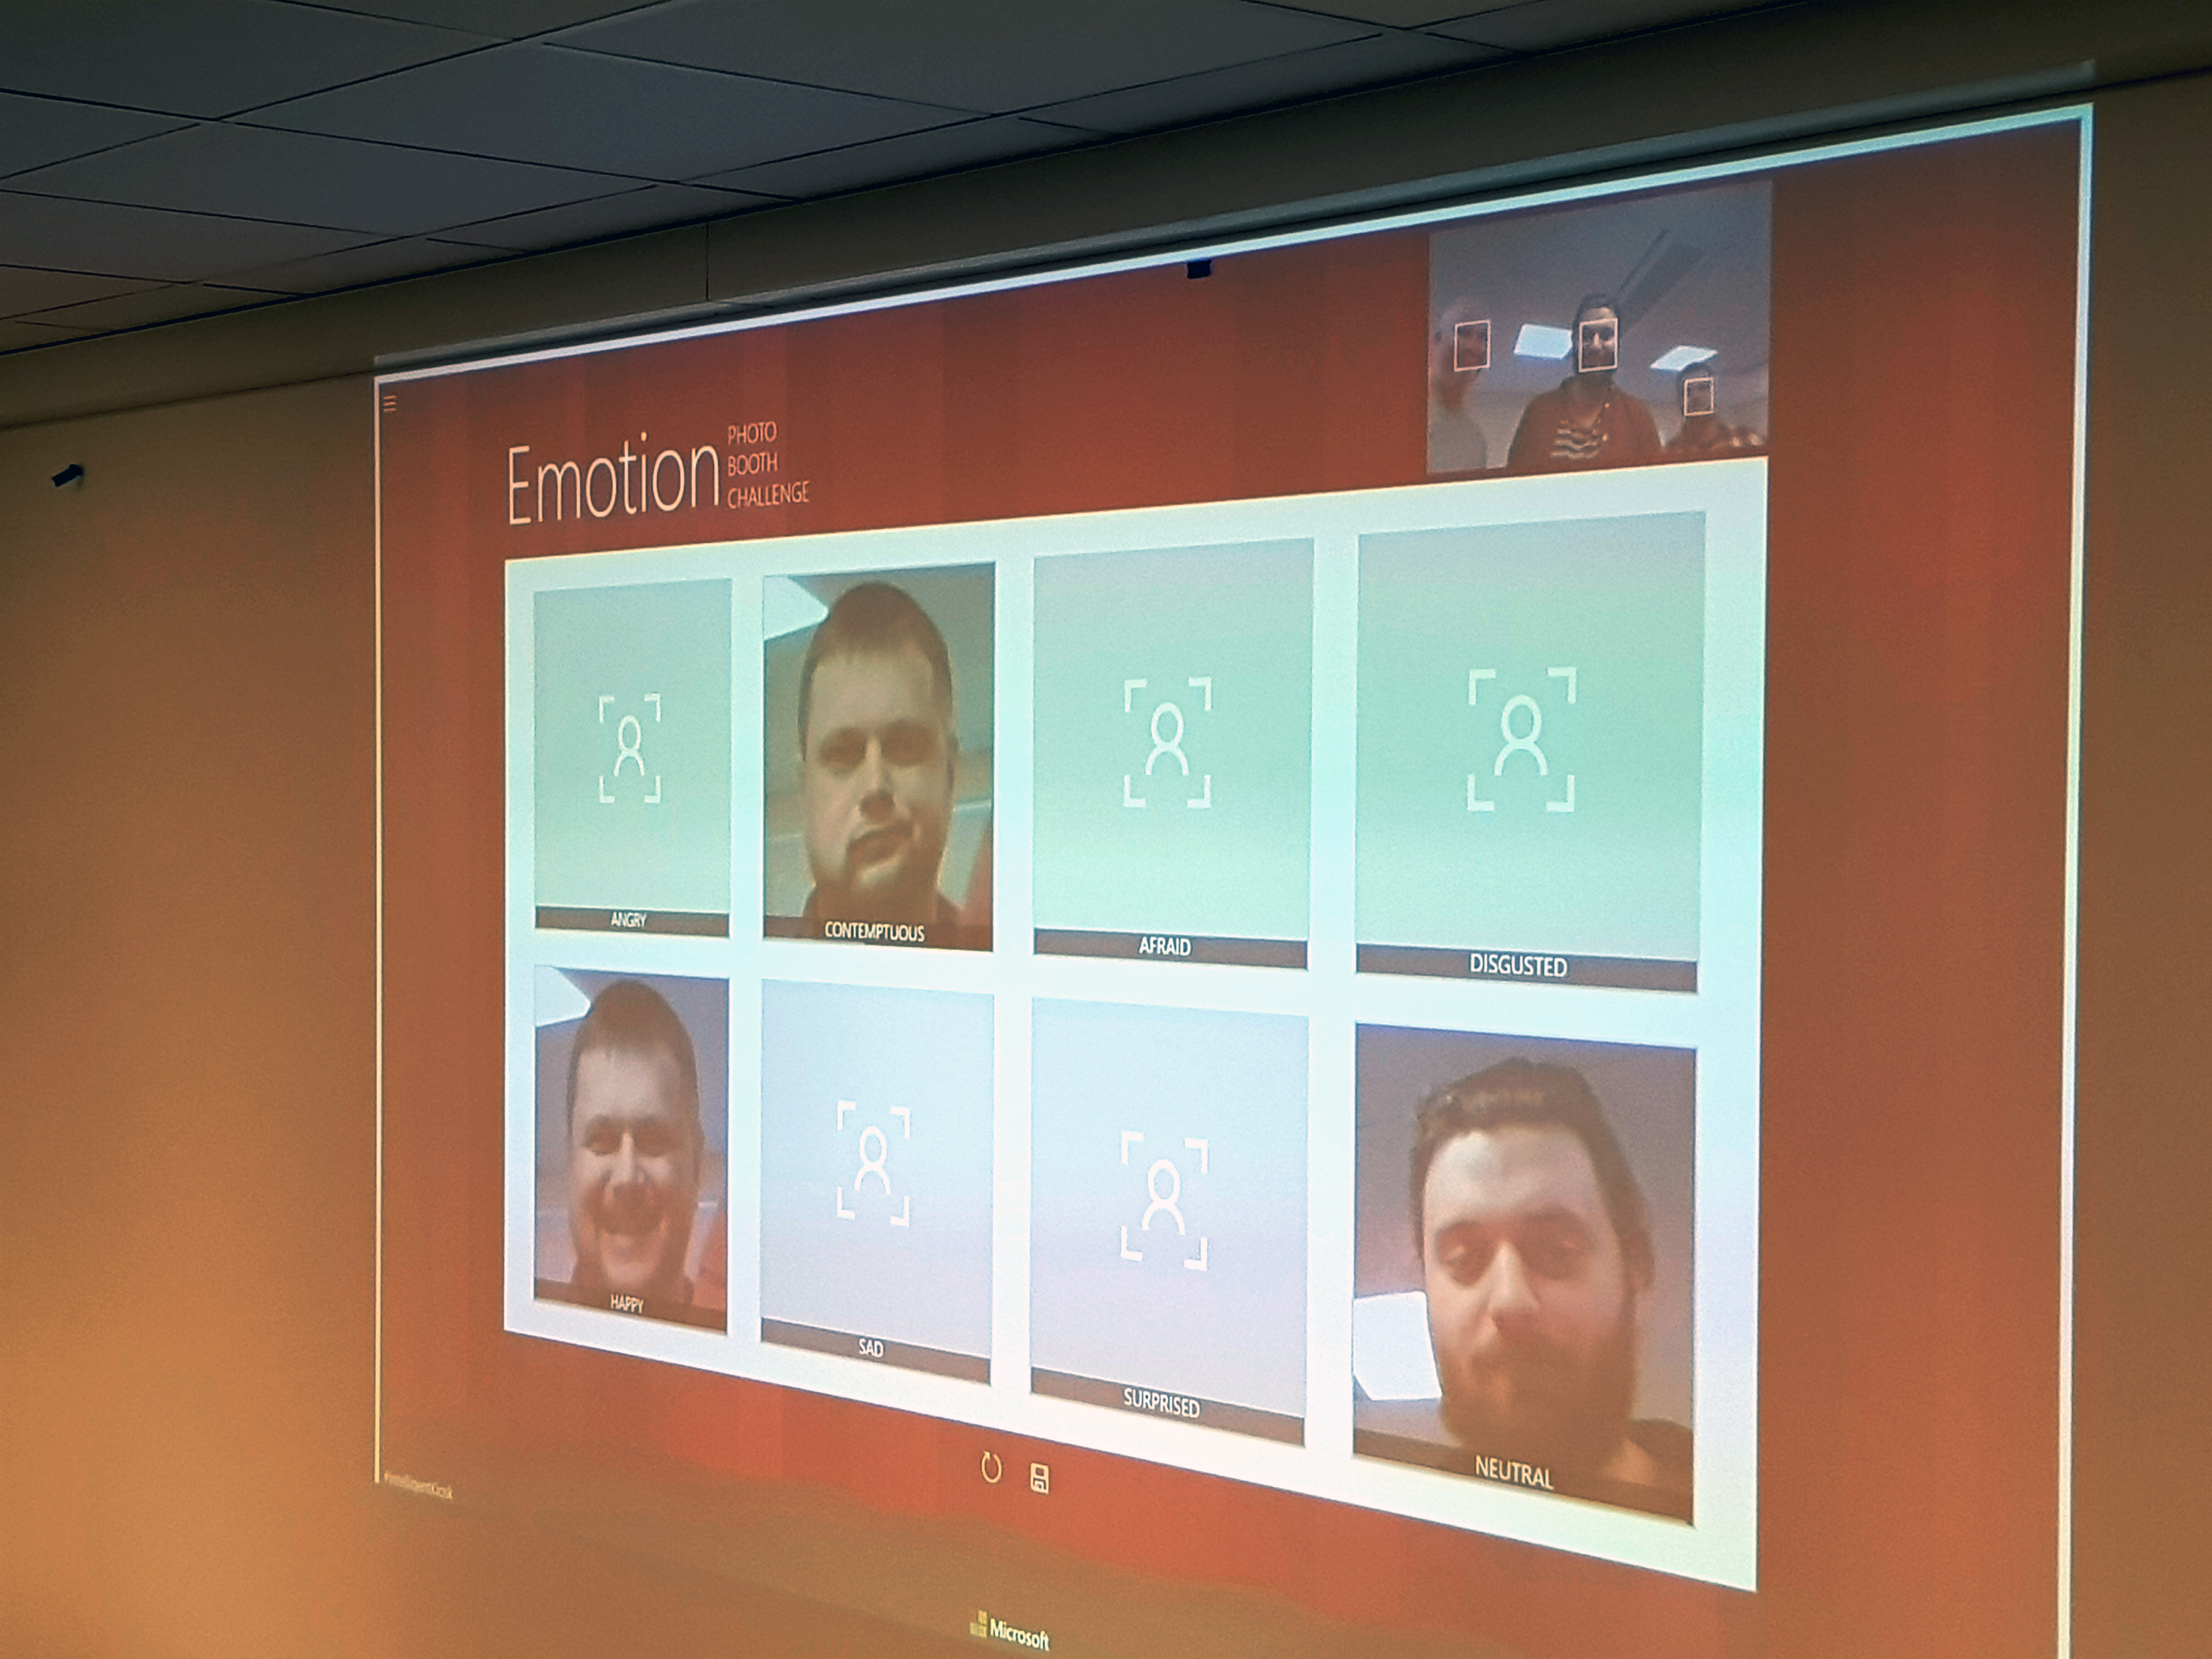 Emotion recognition with Microsoft tool